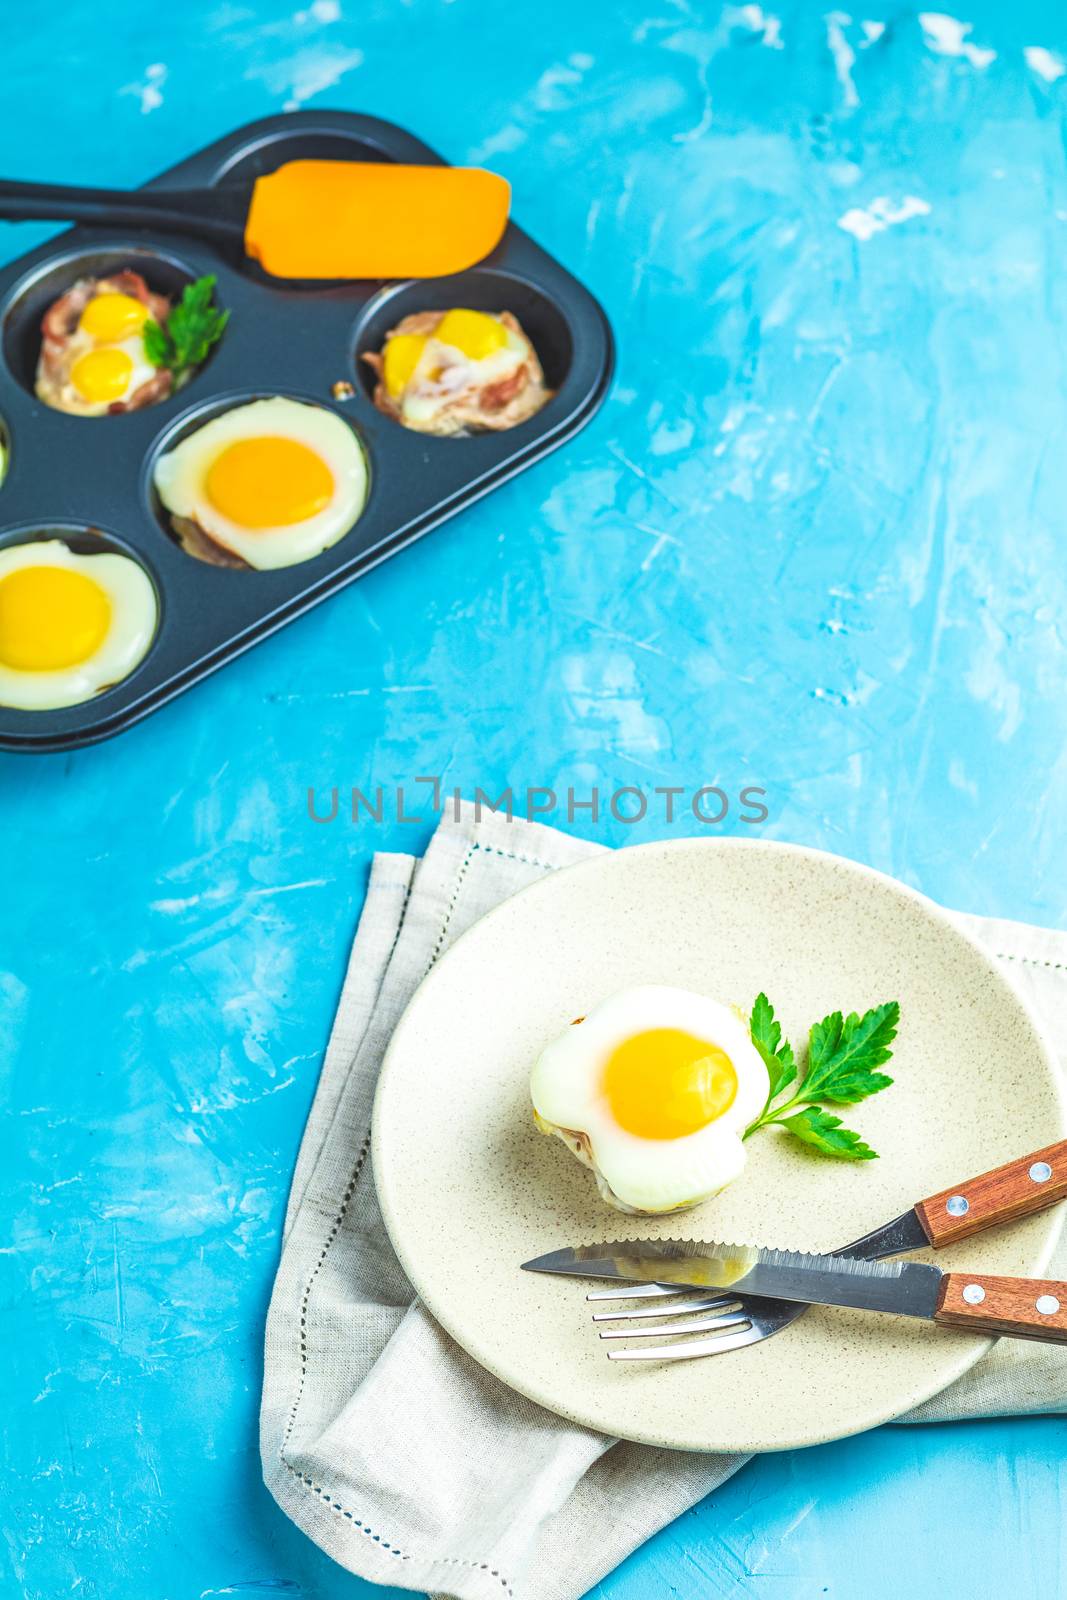 Baked eggs  in light plate and baking molds. Portioned casserole from bacon  and eggs in Italian style. Blue concrete table surface background.